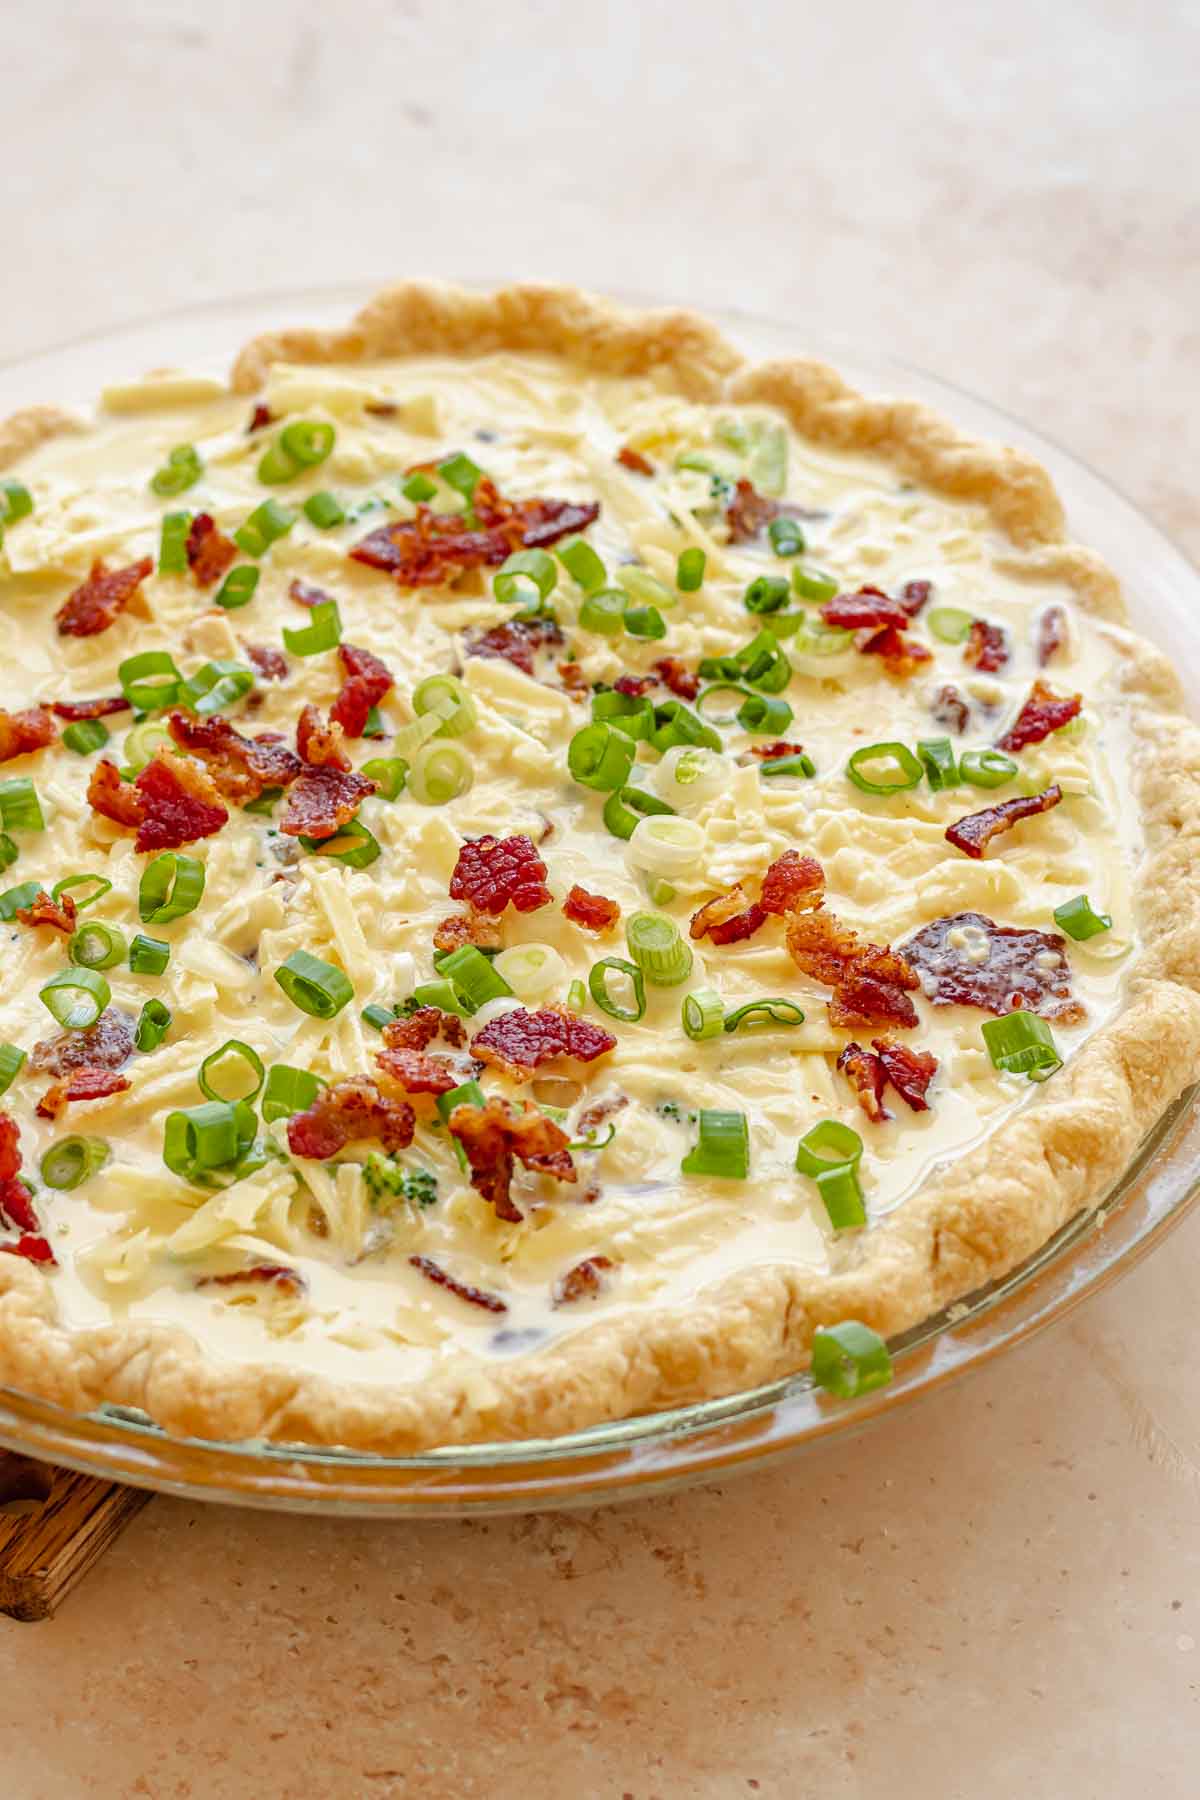 Pre-baked quiche topped with scallions.